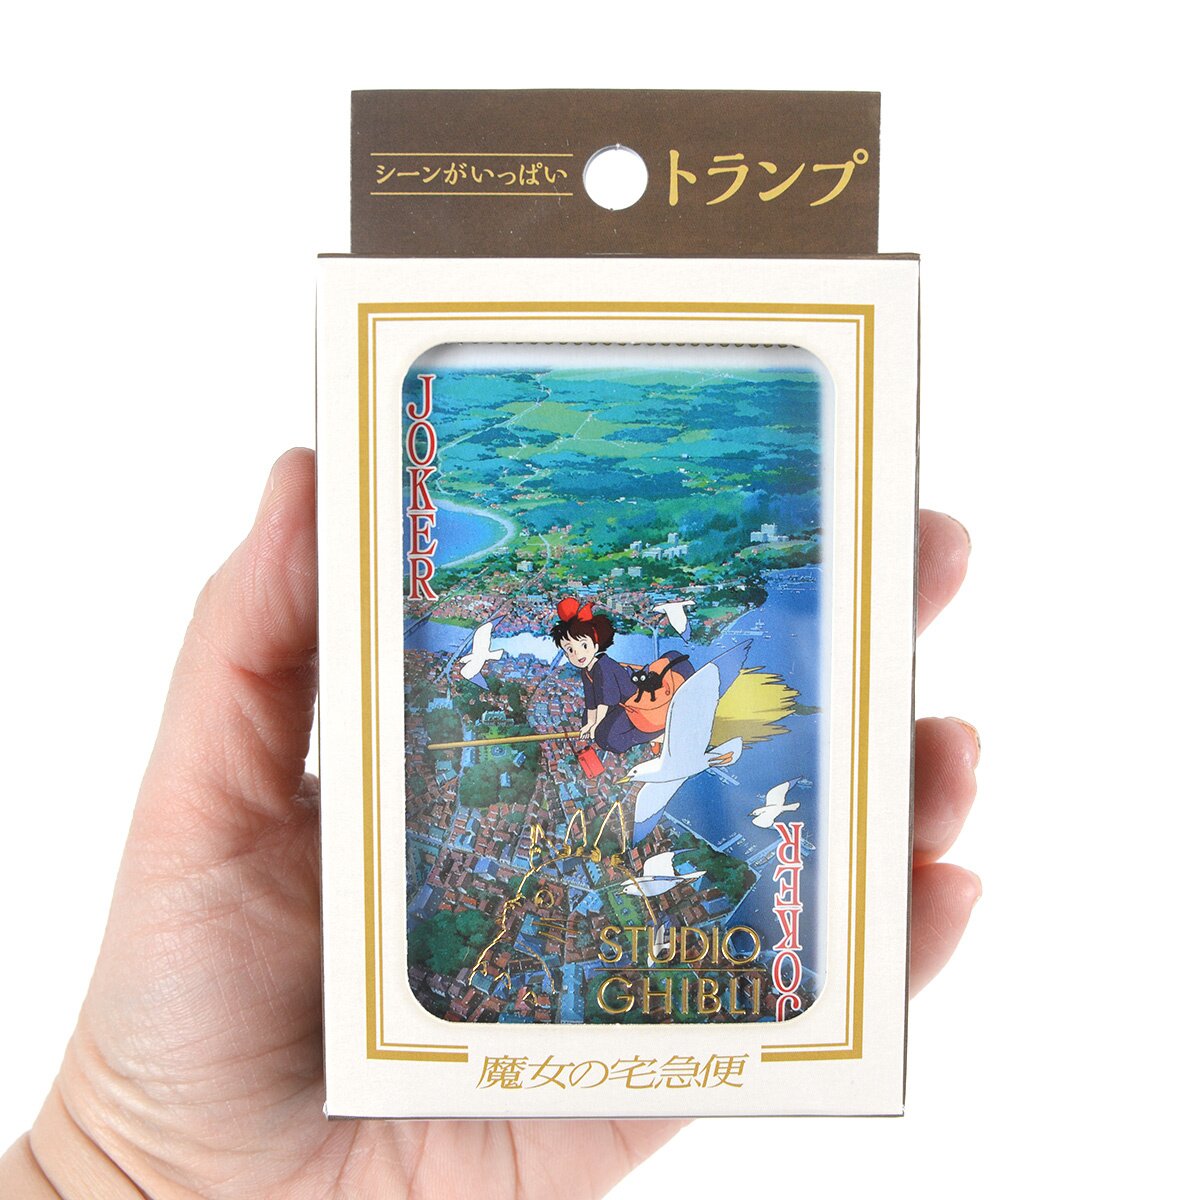 Kiki's Delivery Service Movie Scenes Playing Cards: Ghibli - Tokyo ...